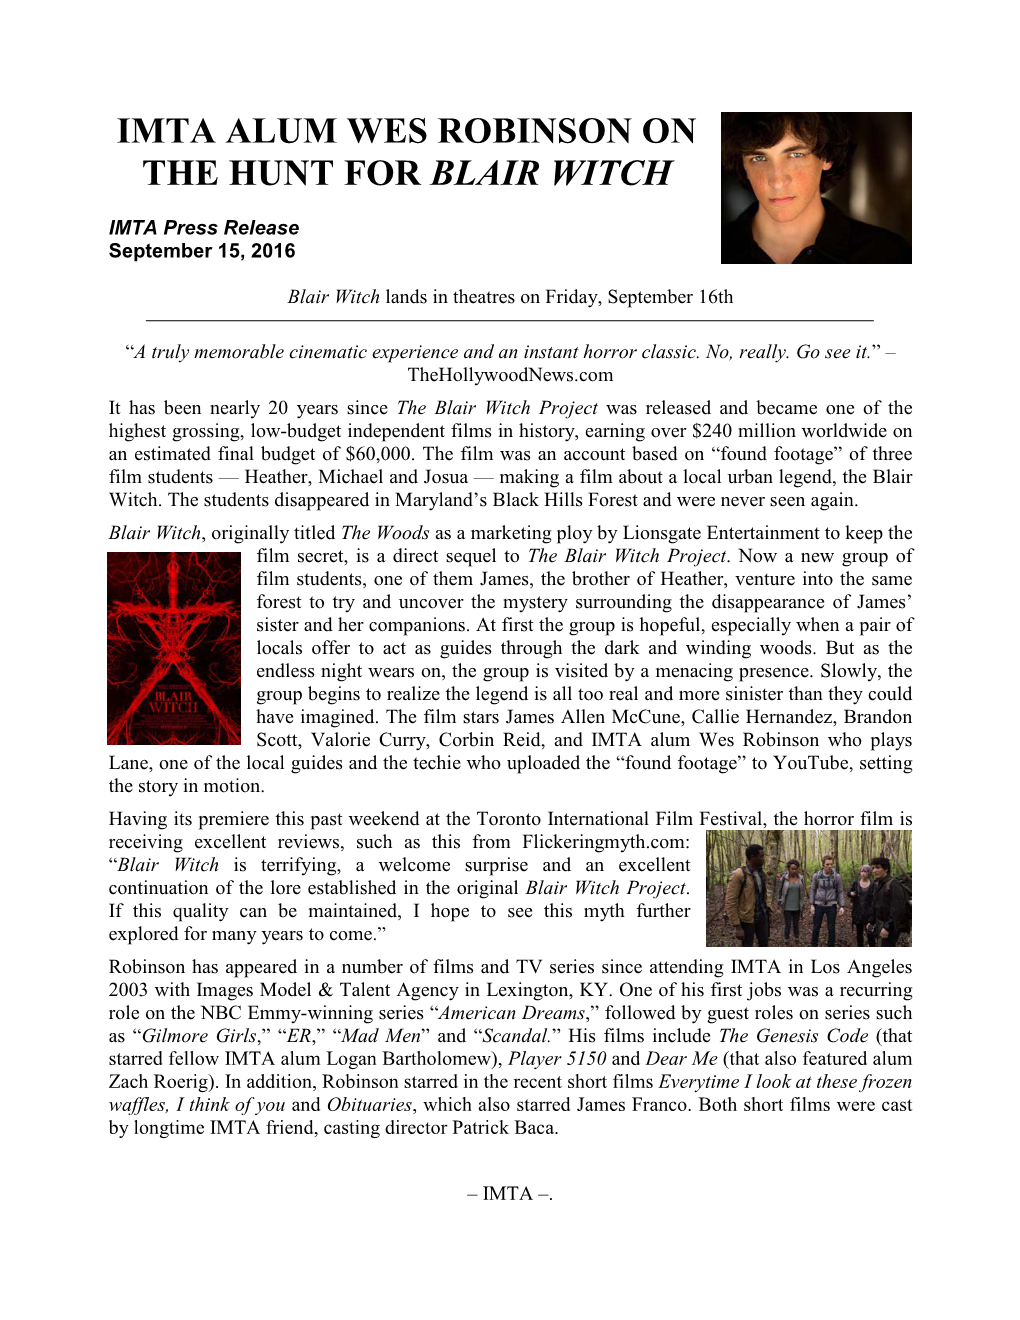 Imta Alum Wes Robinson on the Hunt for Blair Witch